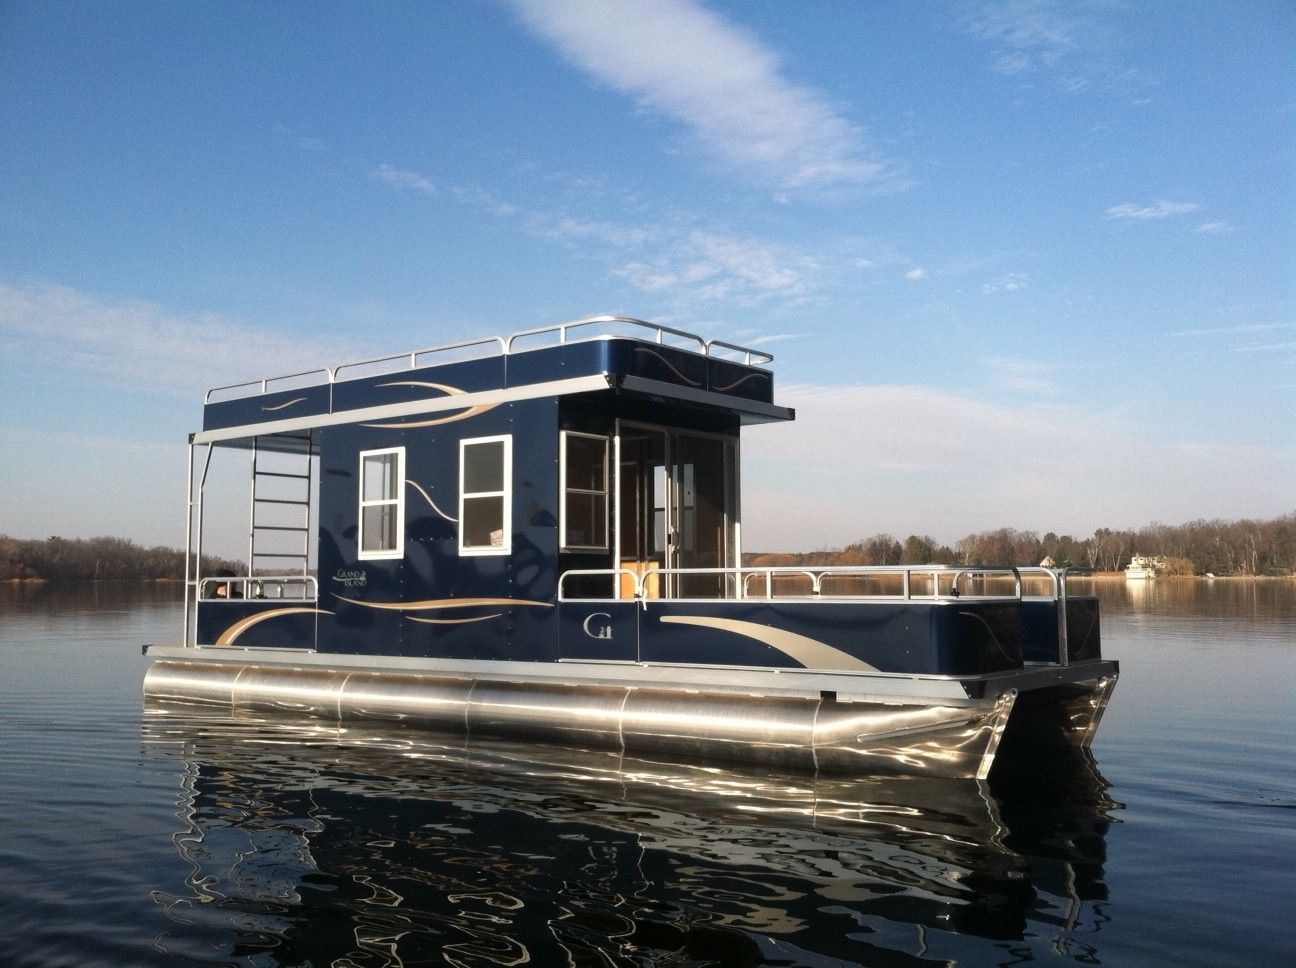 new 32 ft house boat 2014 for sale for $14,000 - boats